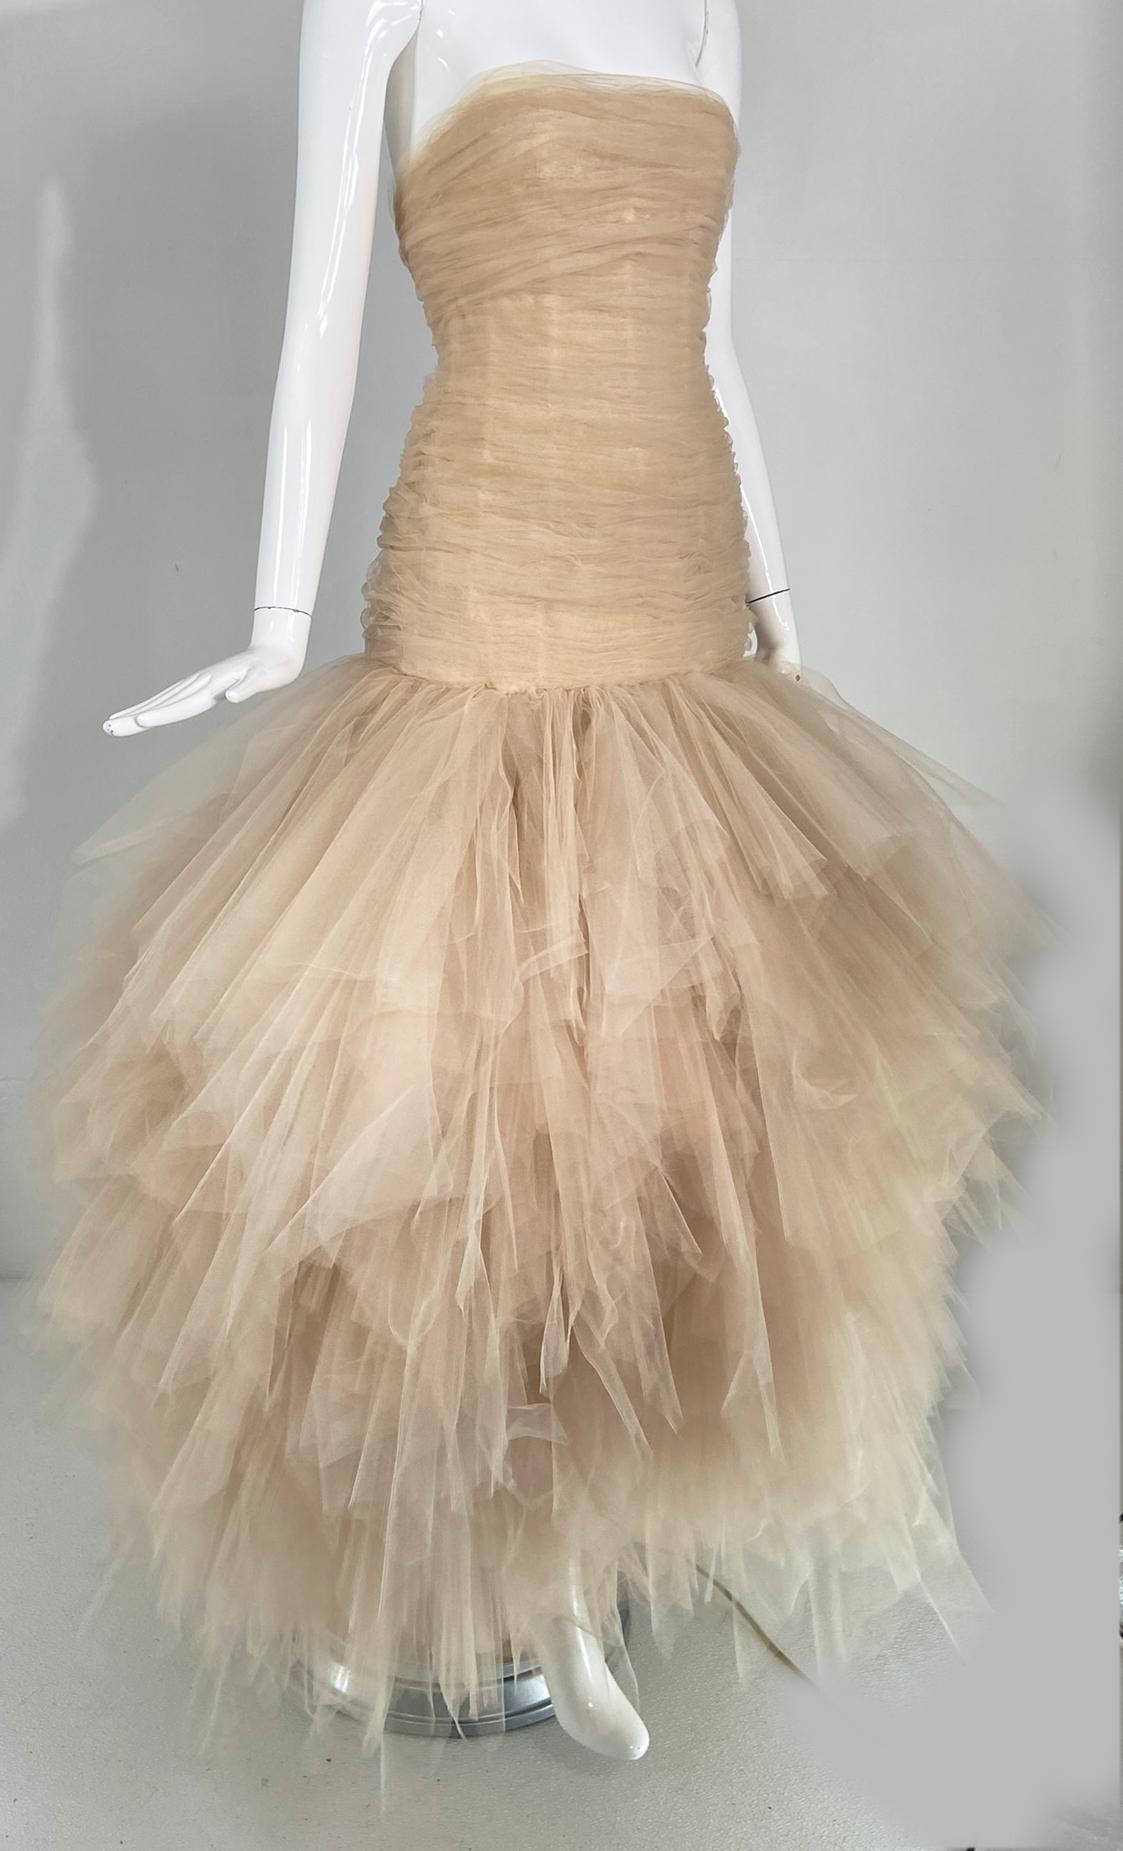 Oscar de la Renta runway champagne layered tulle strapless gown 2007. A magical gown in shades of pale champagne gold tulle, the layering of shades give depth to the color. The fitted bodice is strapless and shirred to the hip, below the skirt is